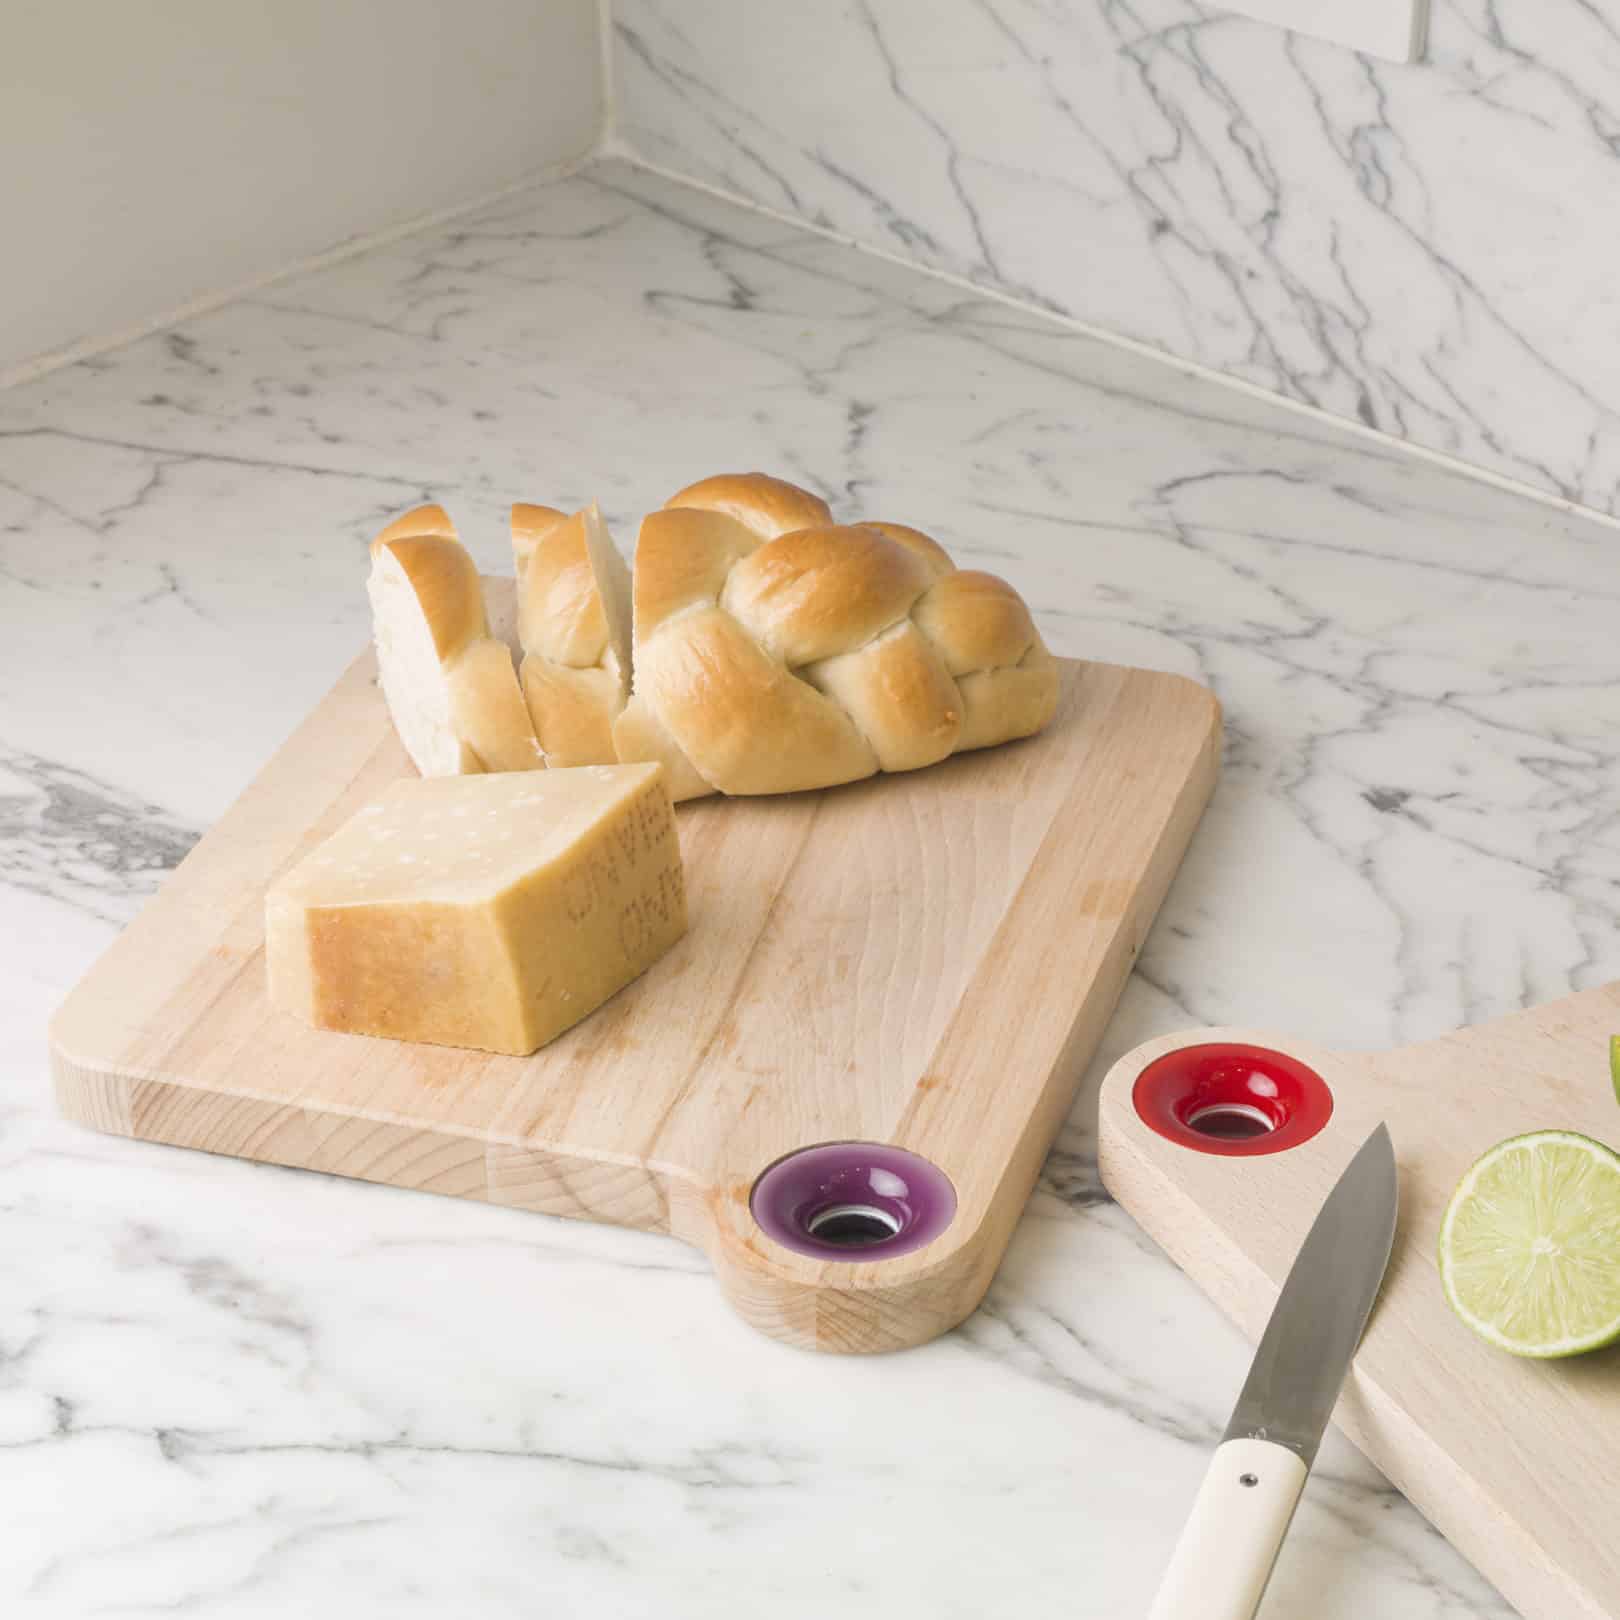 bread and cheese on jojo chopping board